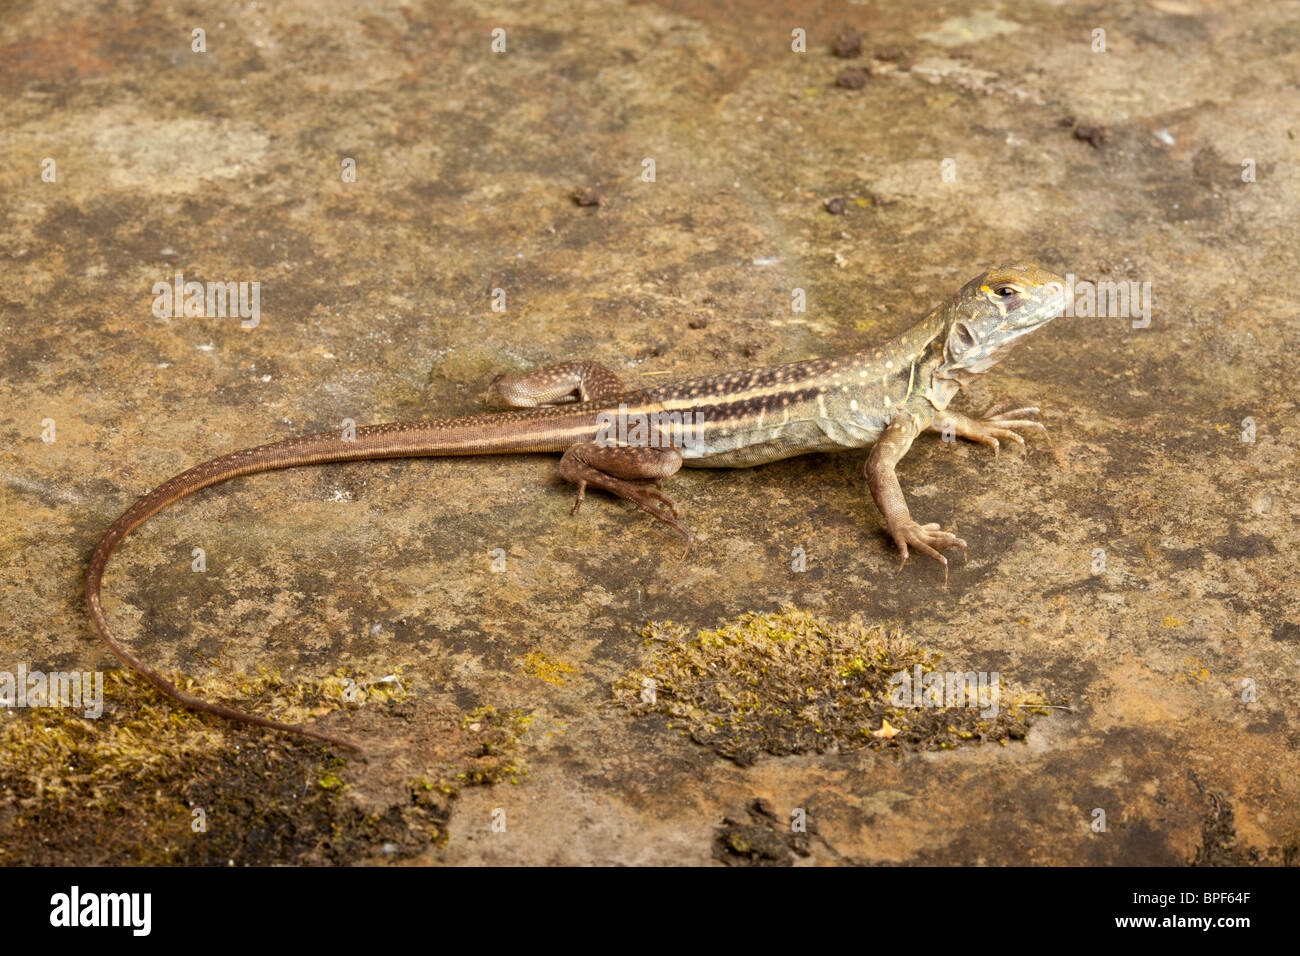 Chinese butterfly lizard, Leiolepis reevesii Stock Photo